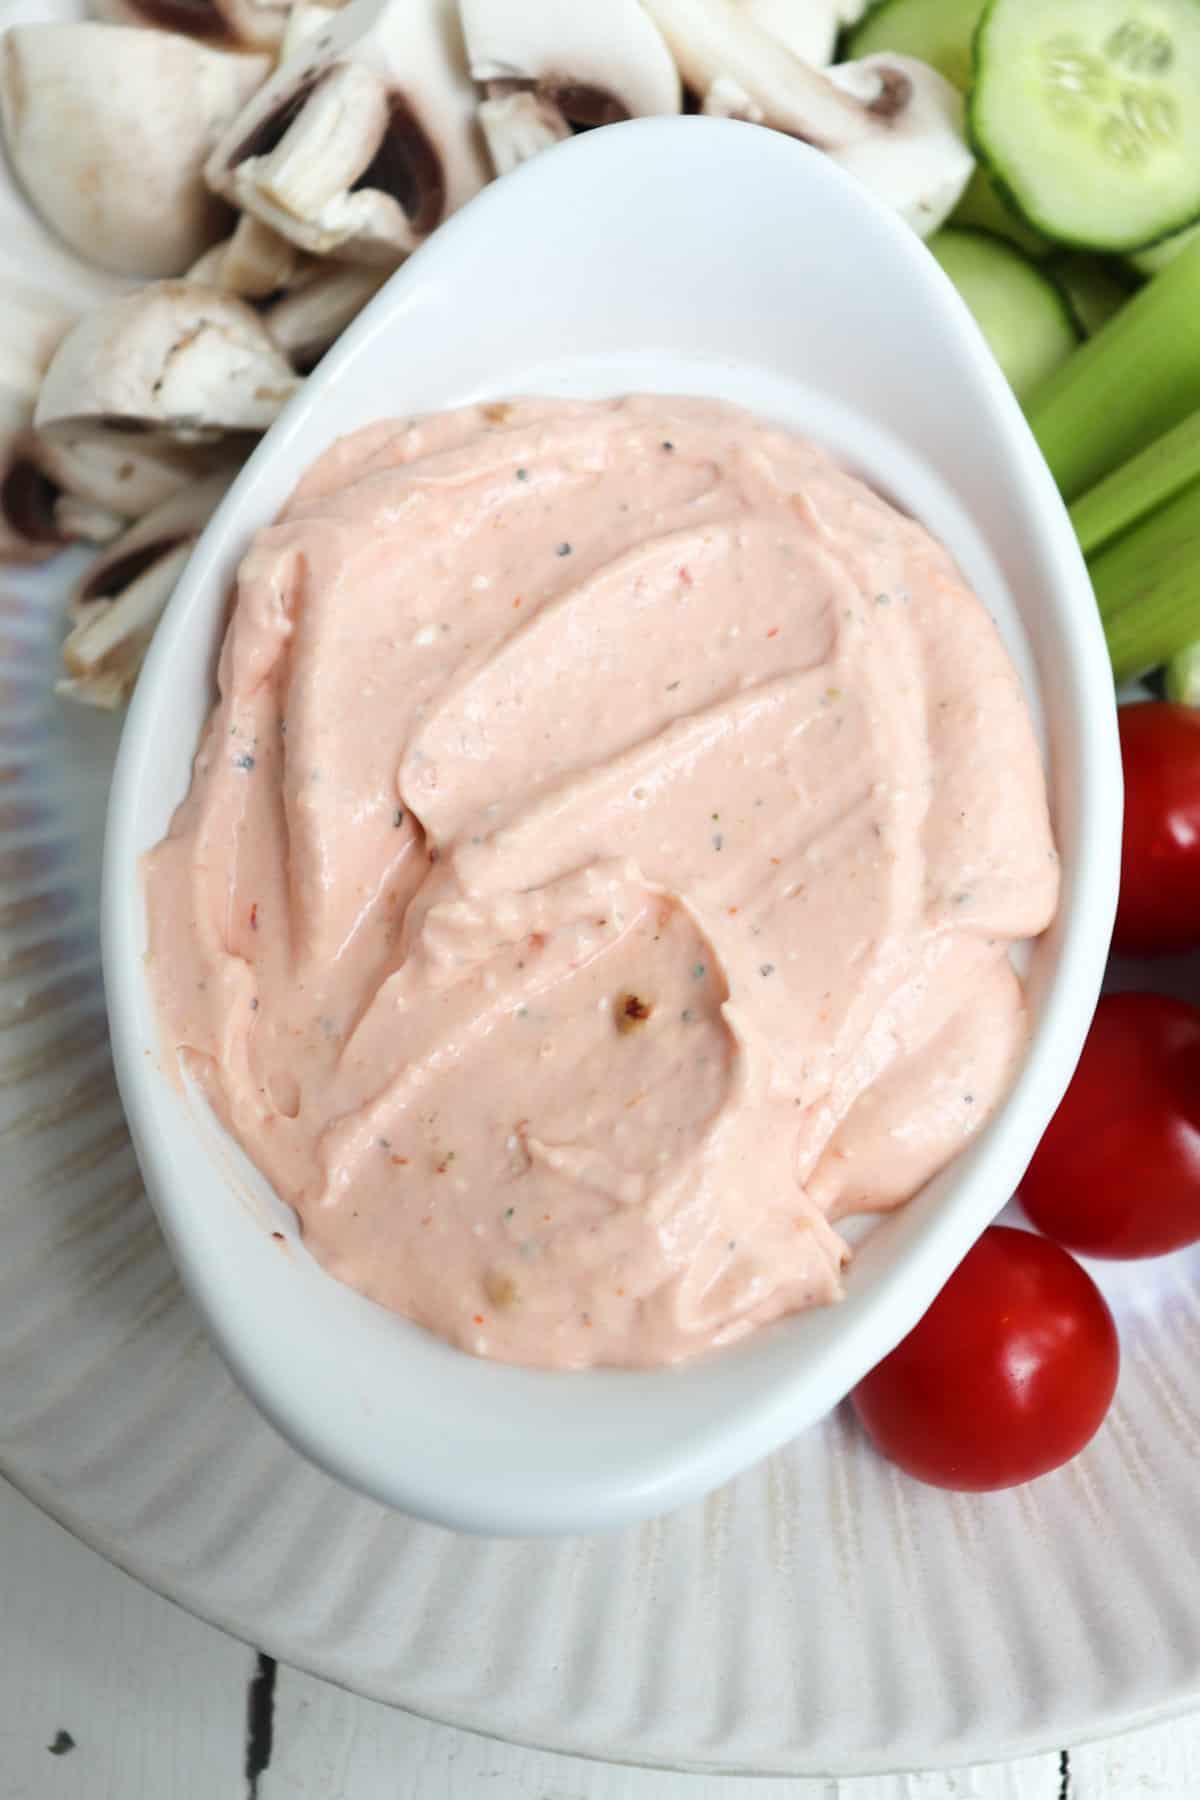 pale pink dip in a serving dish.